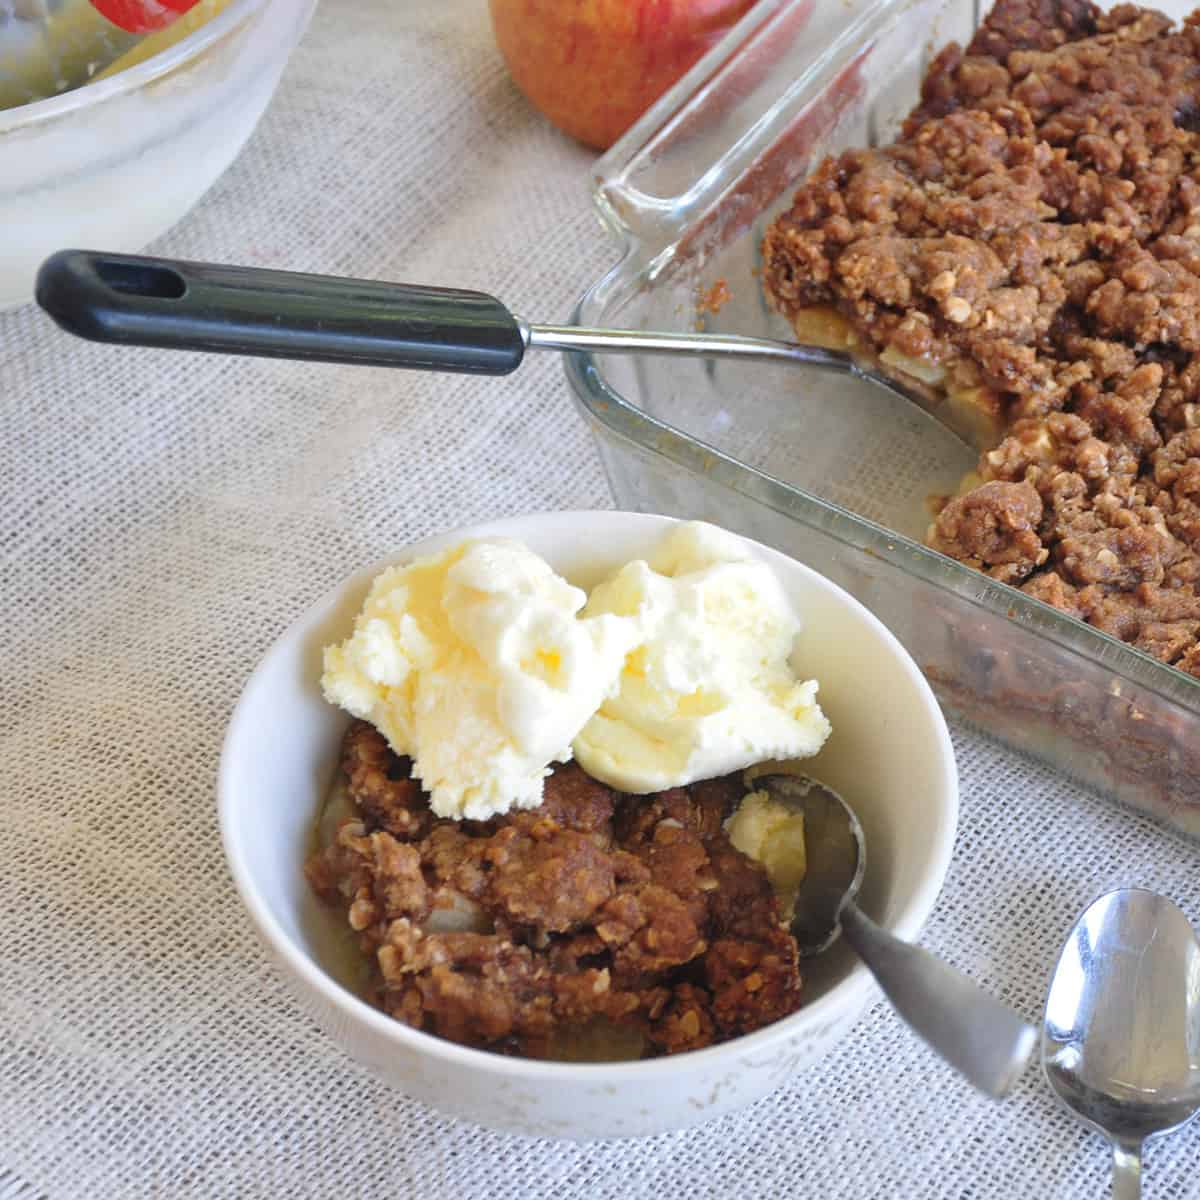 Apple Crisp in a bowl with vanilla ice cream and a tray in the background